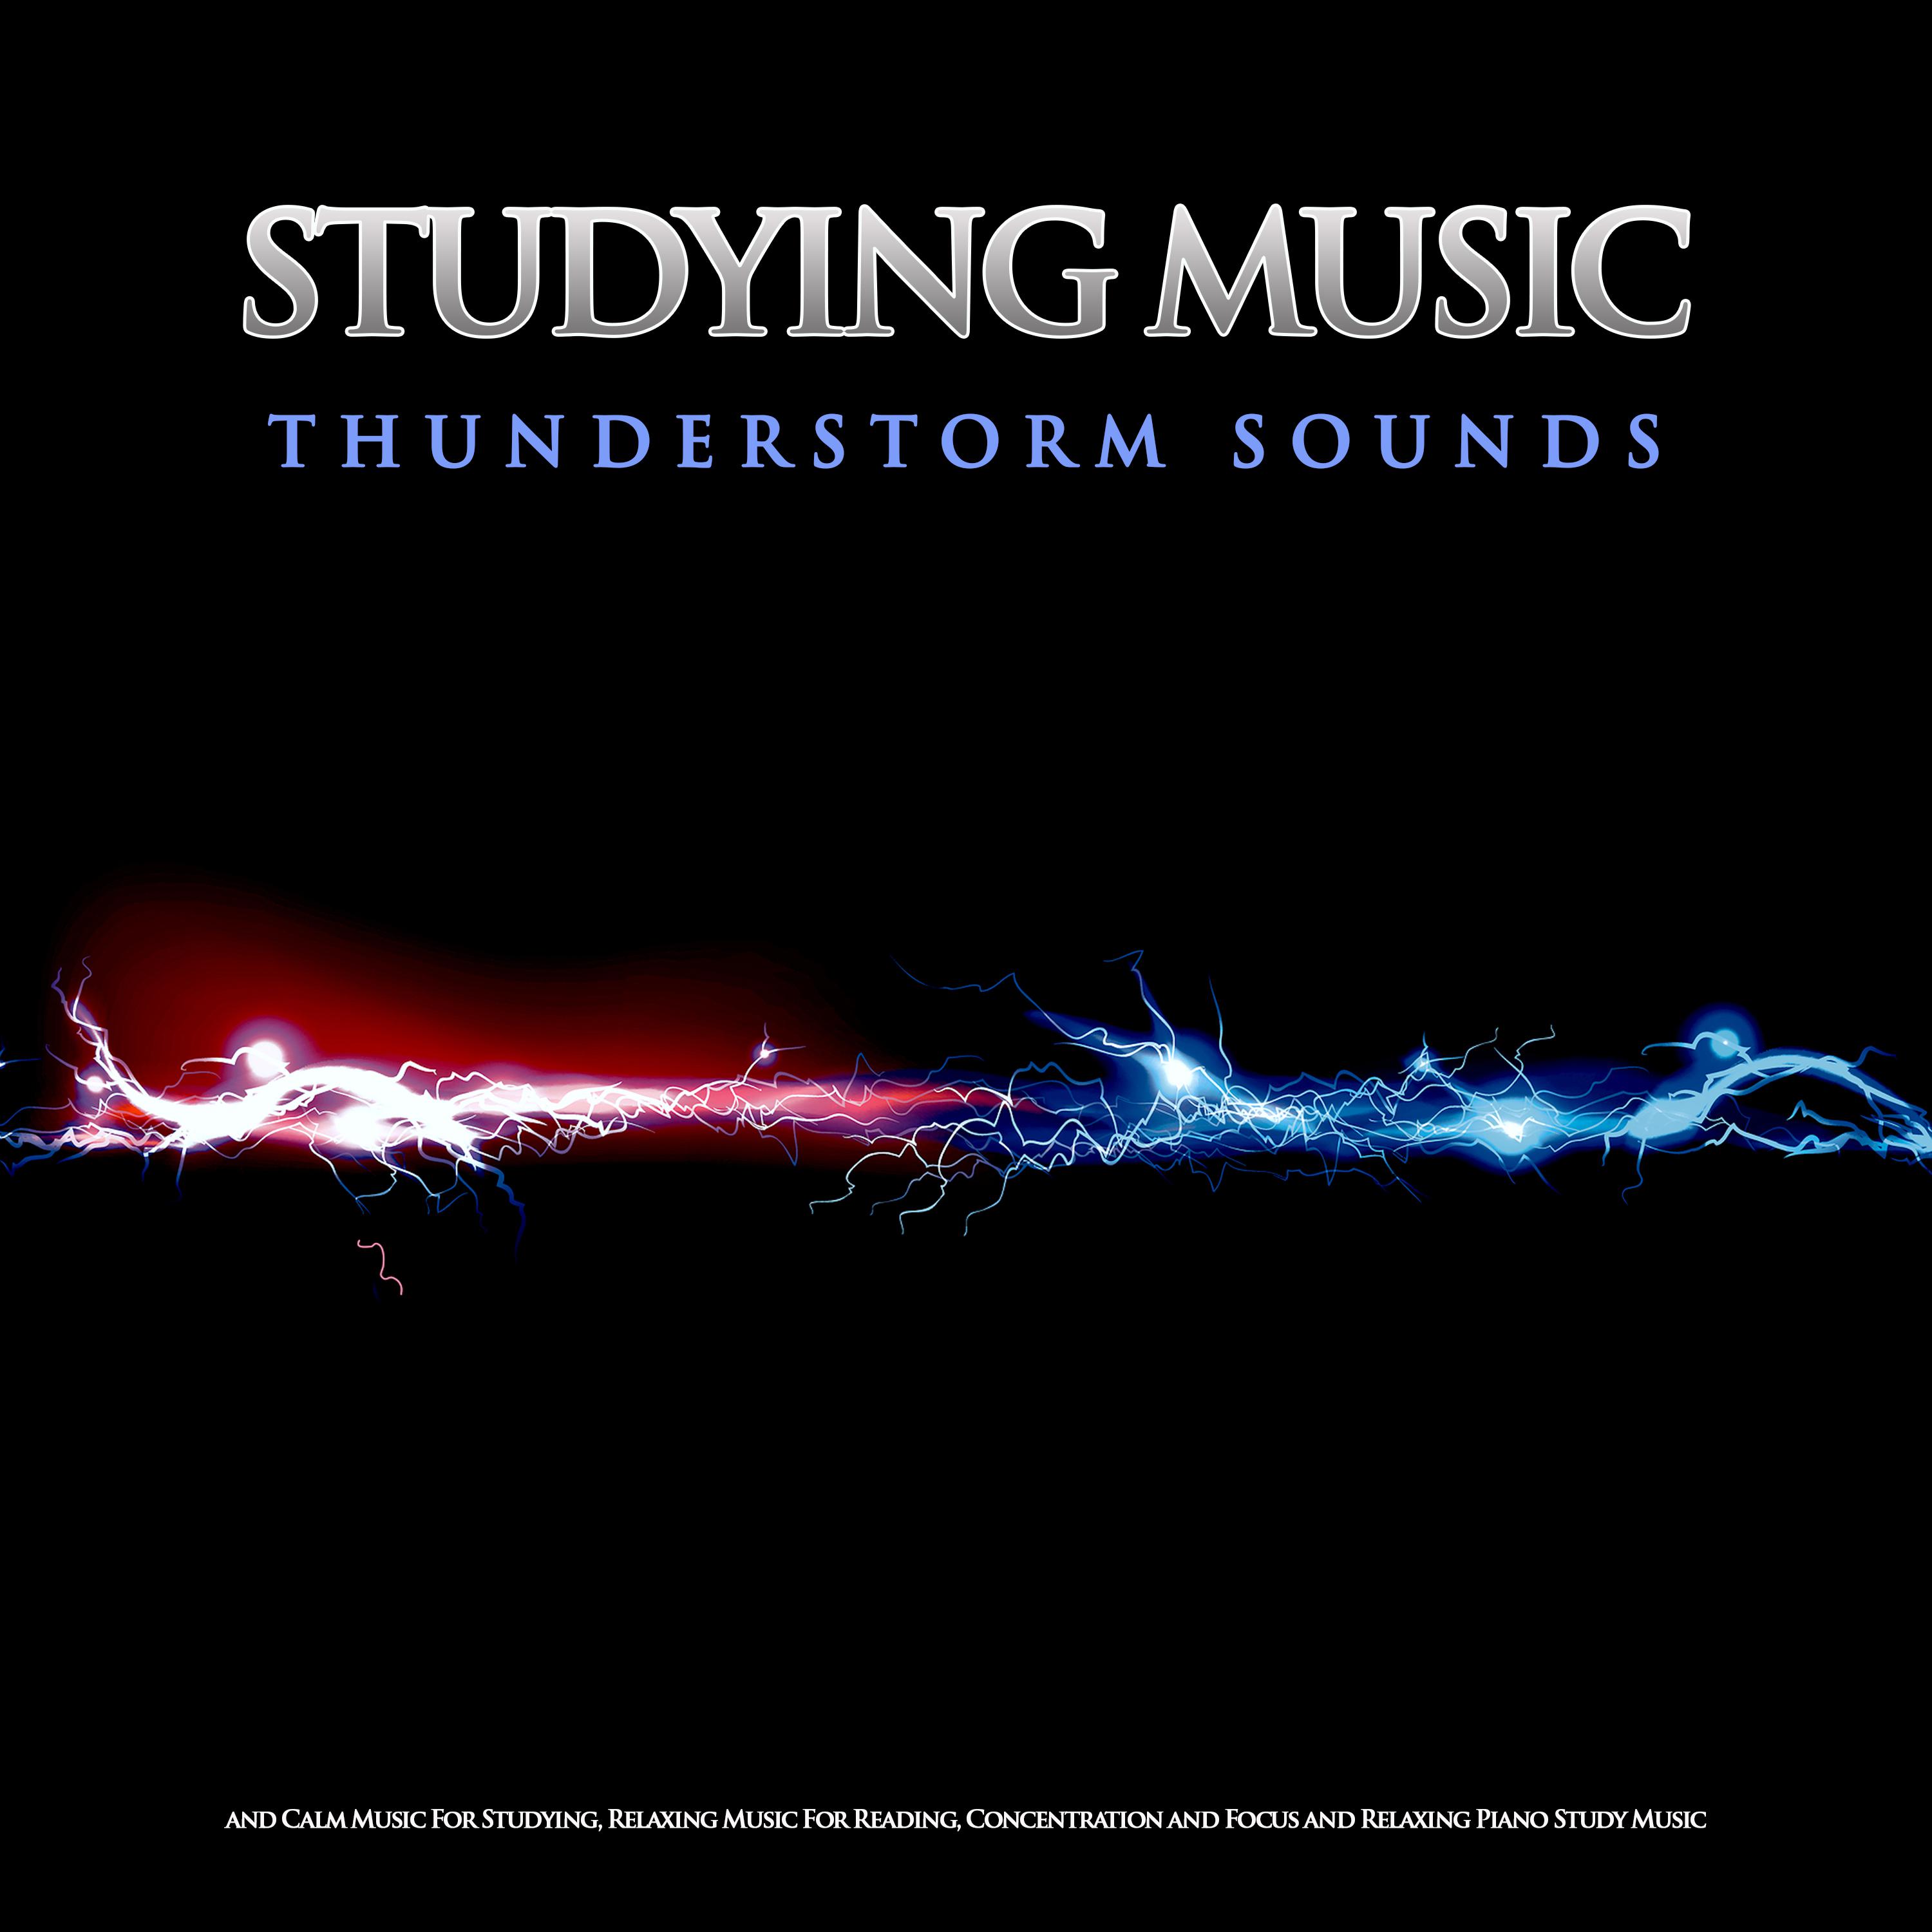 Music For Reading With Thunderstorm Sounds